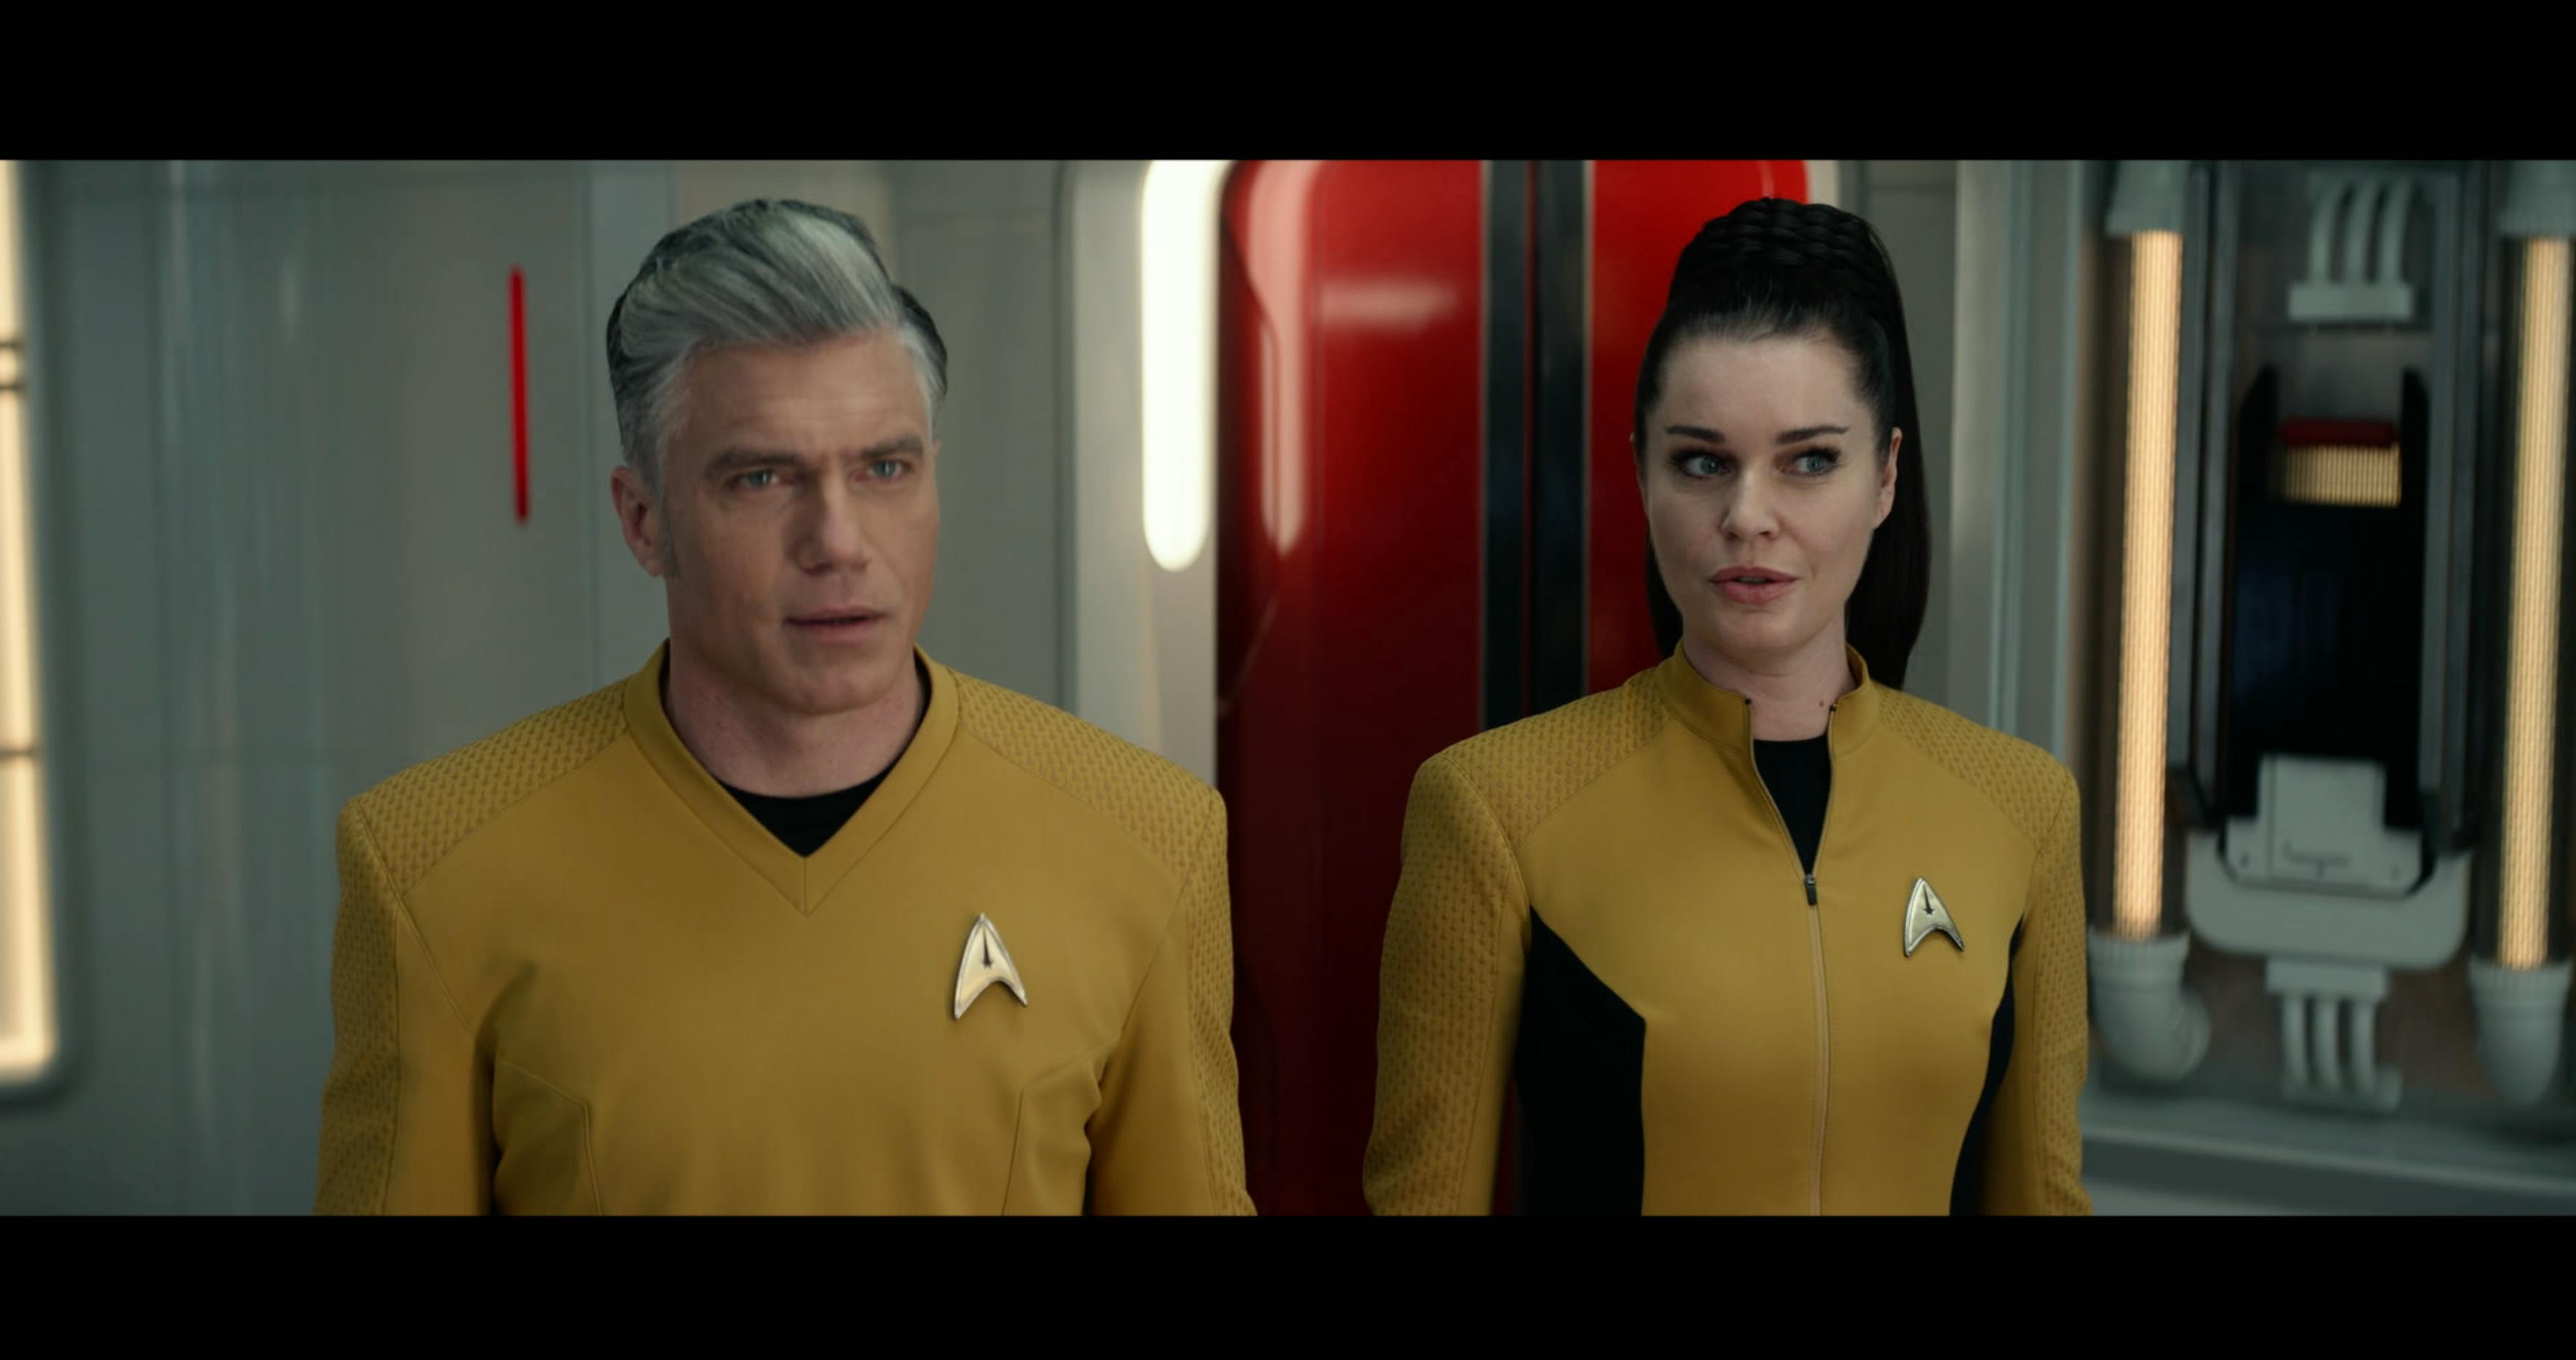 Captain Pike and Number One (Strange New Worlds) stand in the transporter room. Pike looks shocked, and Number One looks slightly confused as well.